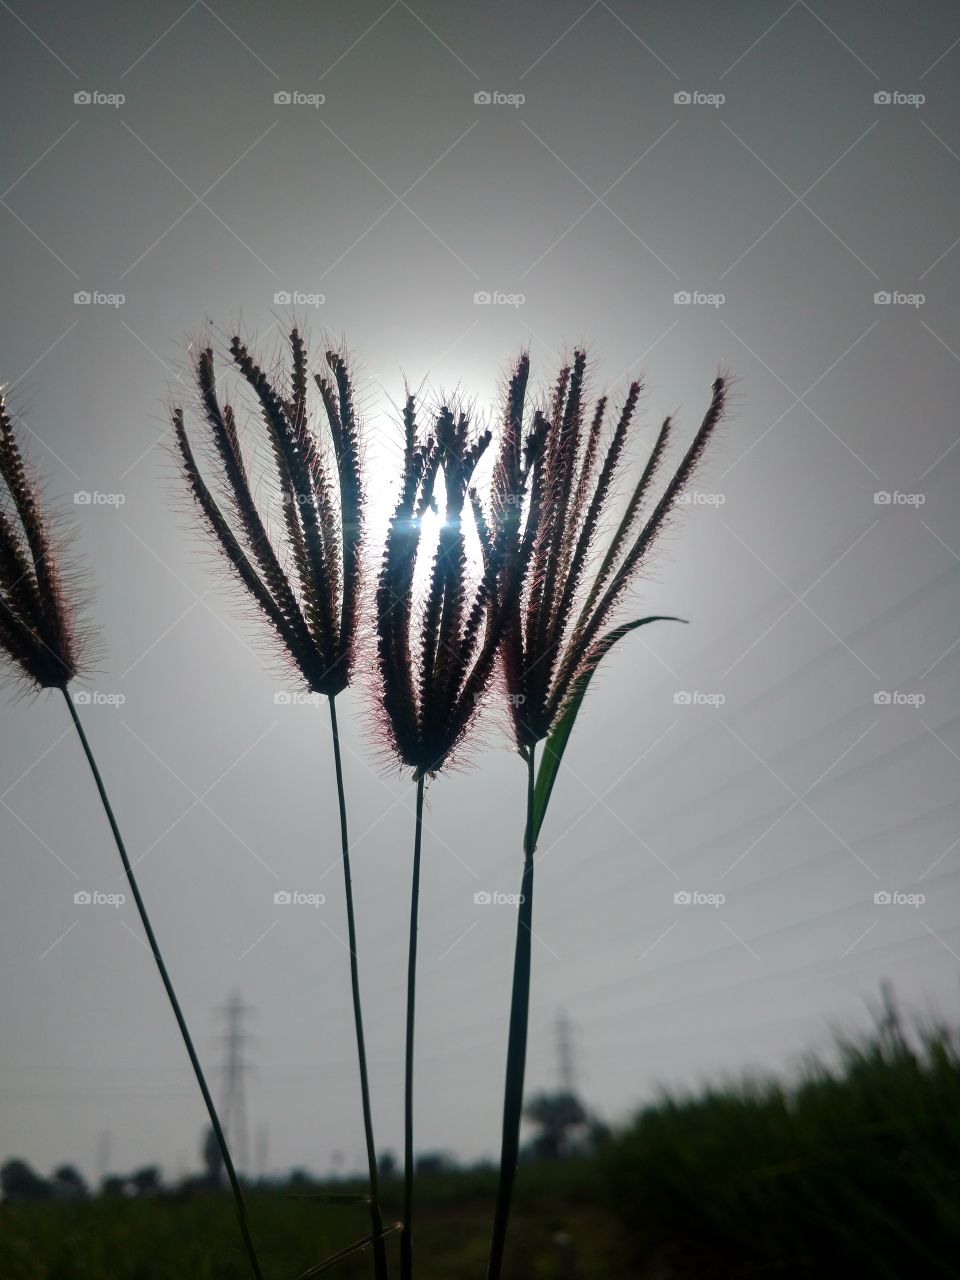 Photography with Beautiful GRASS.